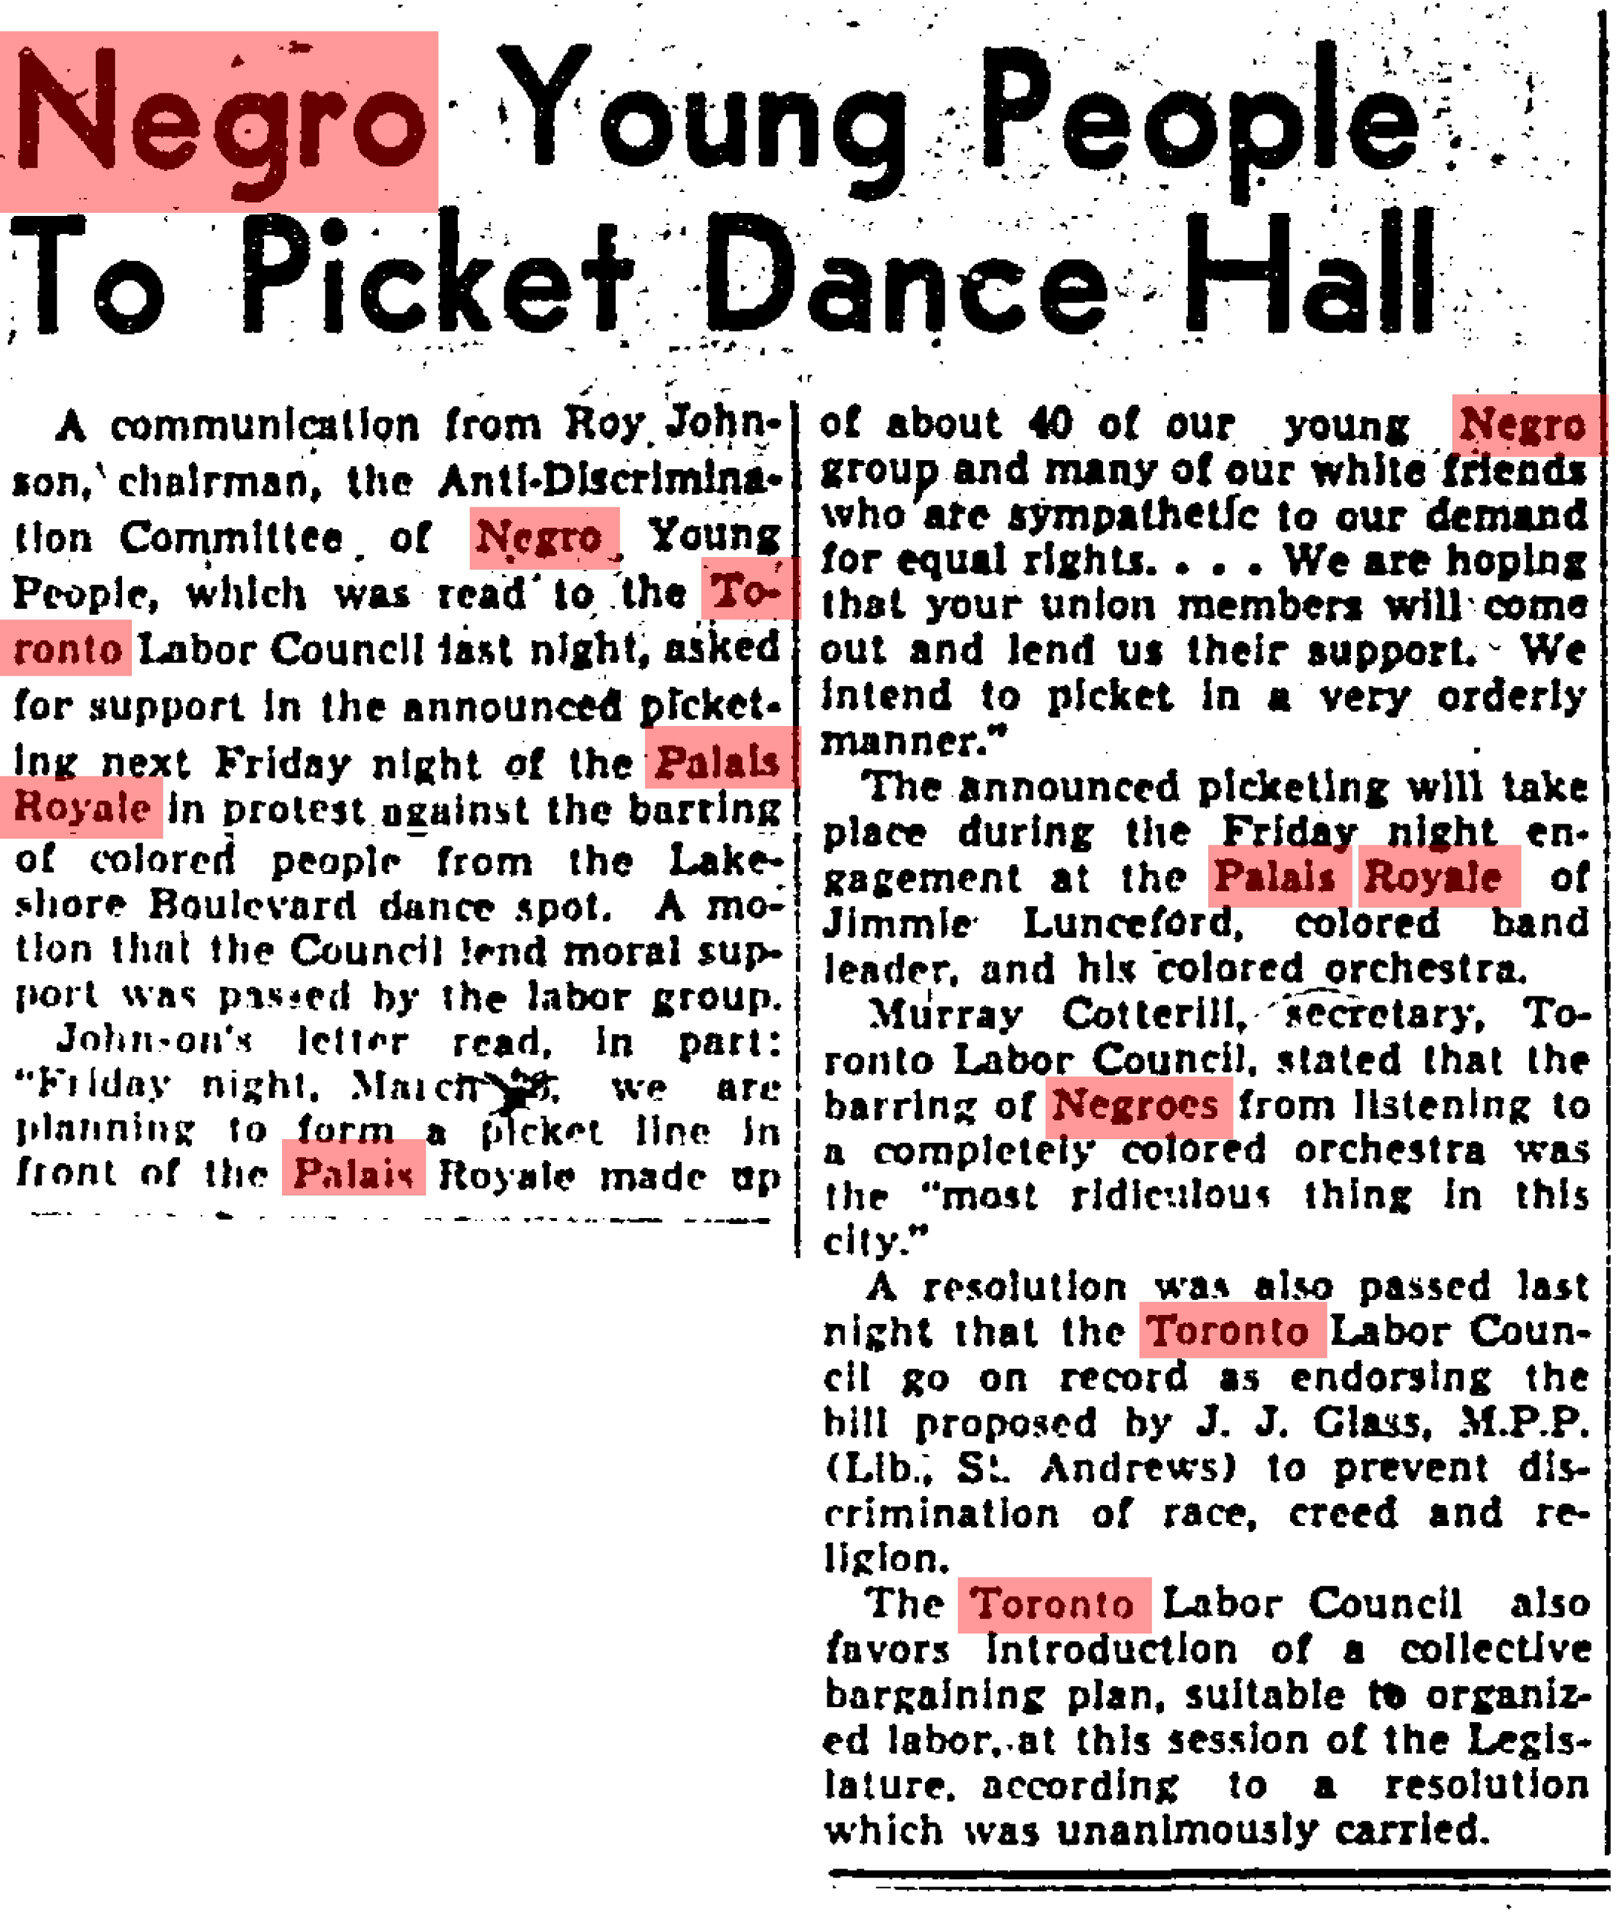 "Negro Young People To Picket Dance Hall," Globe and Mail, 1943